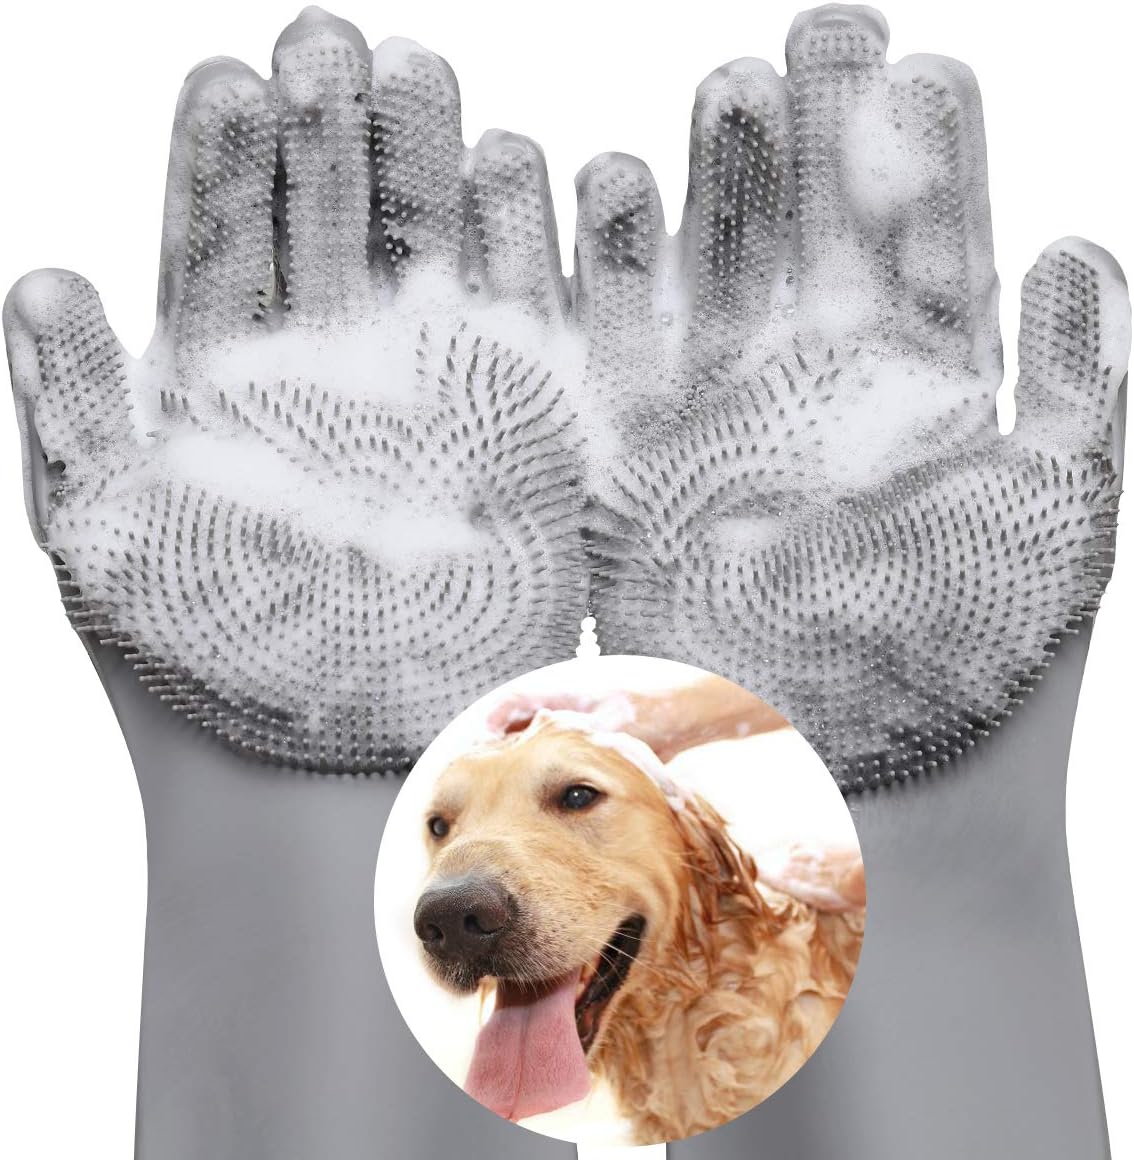 Magic Pet Grooming Gloves, Dog Bathing Shampoo Gloves with High Density Teeth, Heat Resistant Silicone Pet Hair Remover Brush for Cat & Dogs, Gray